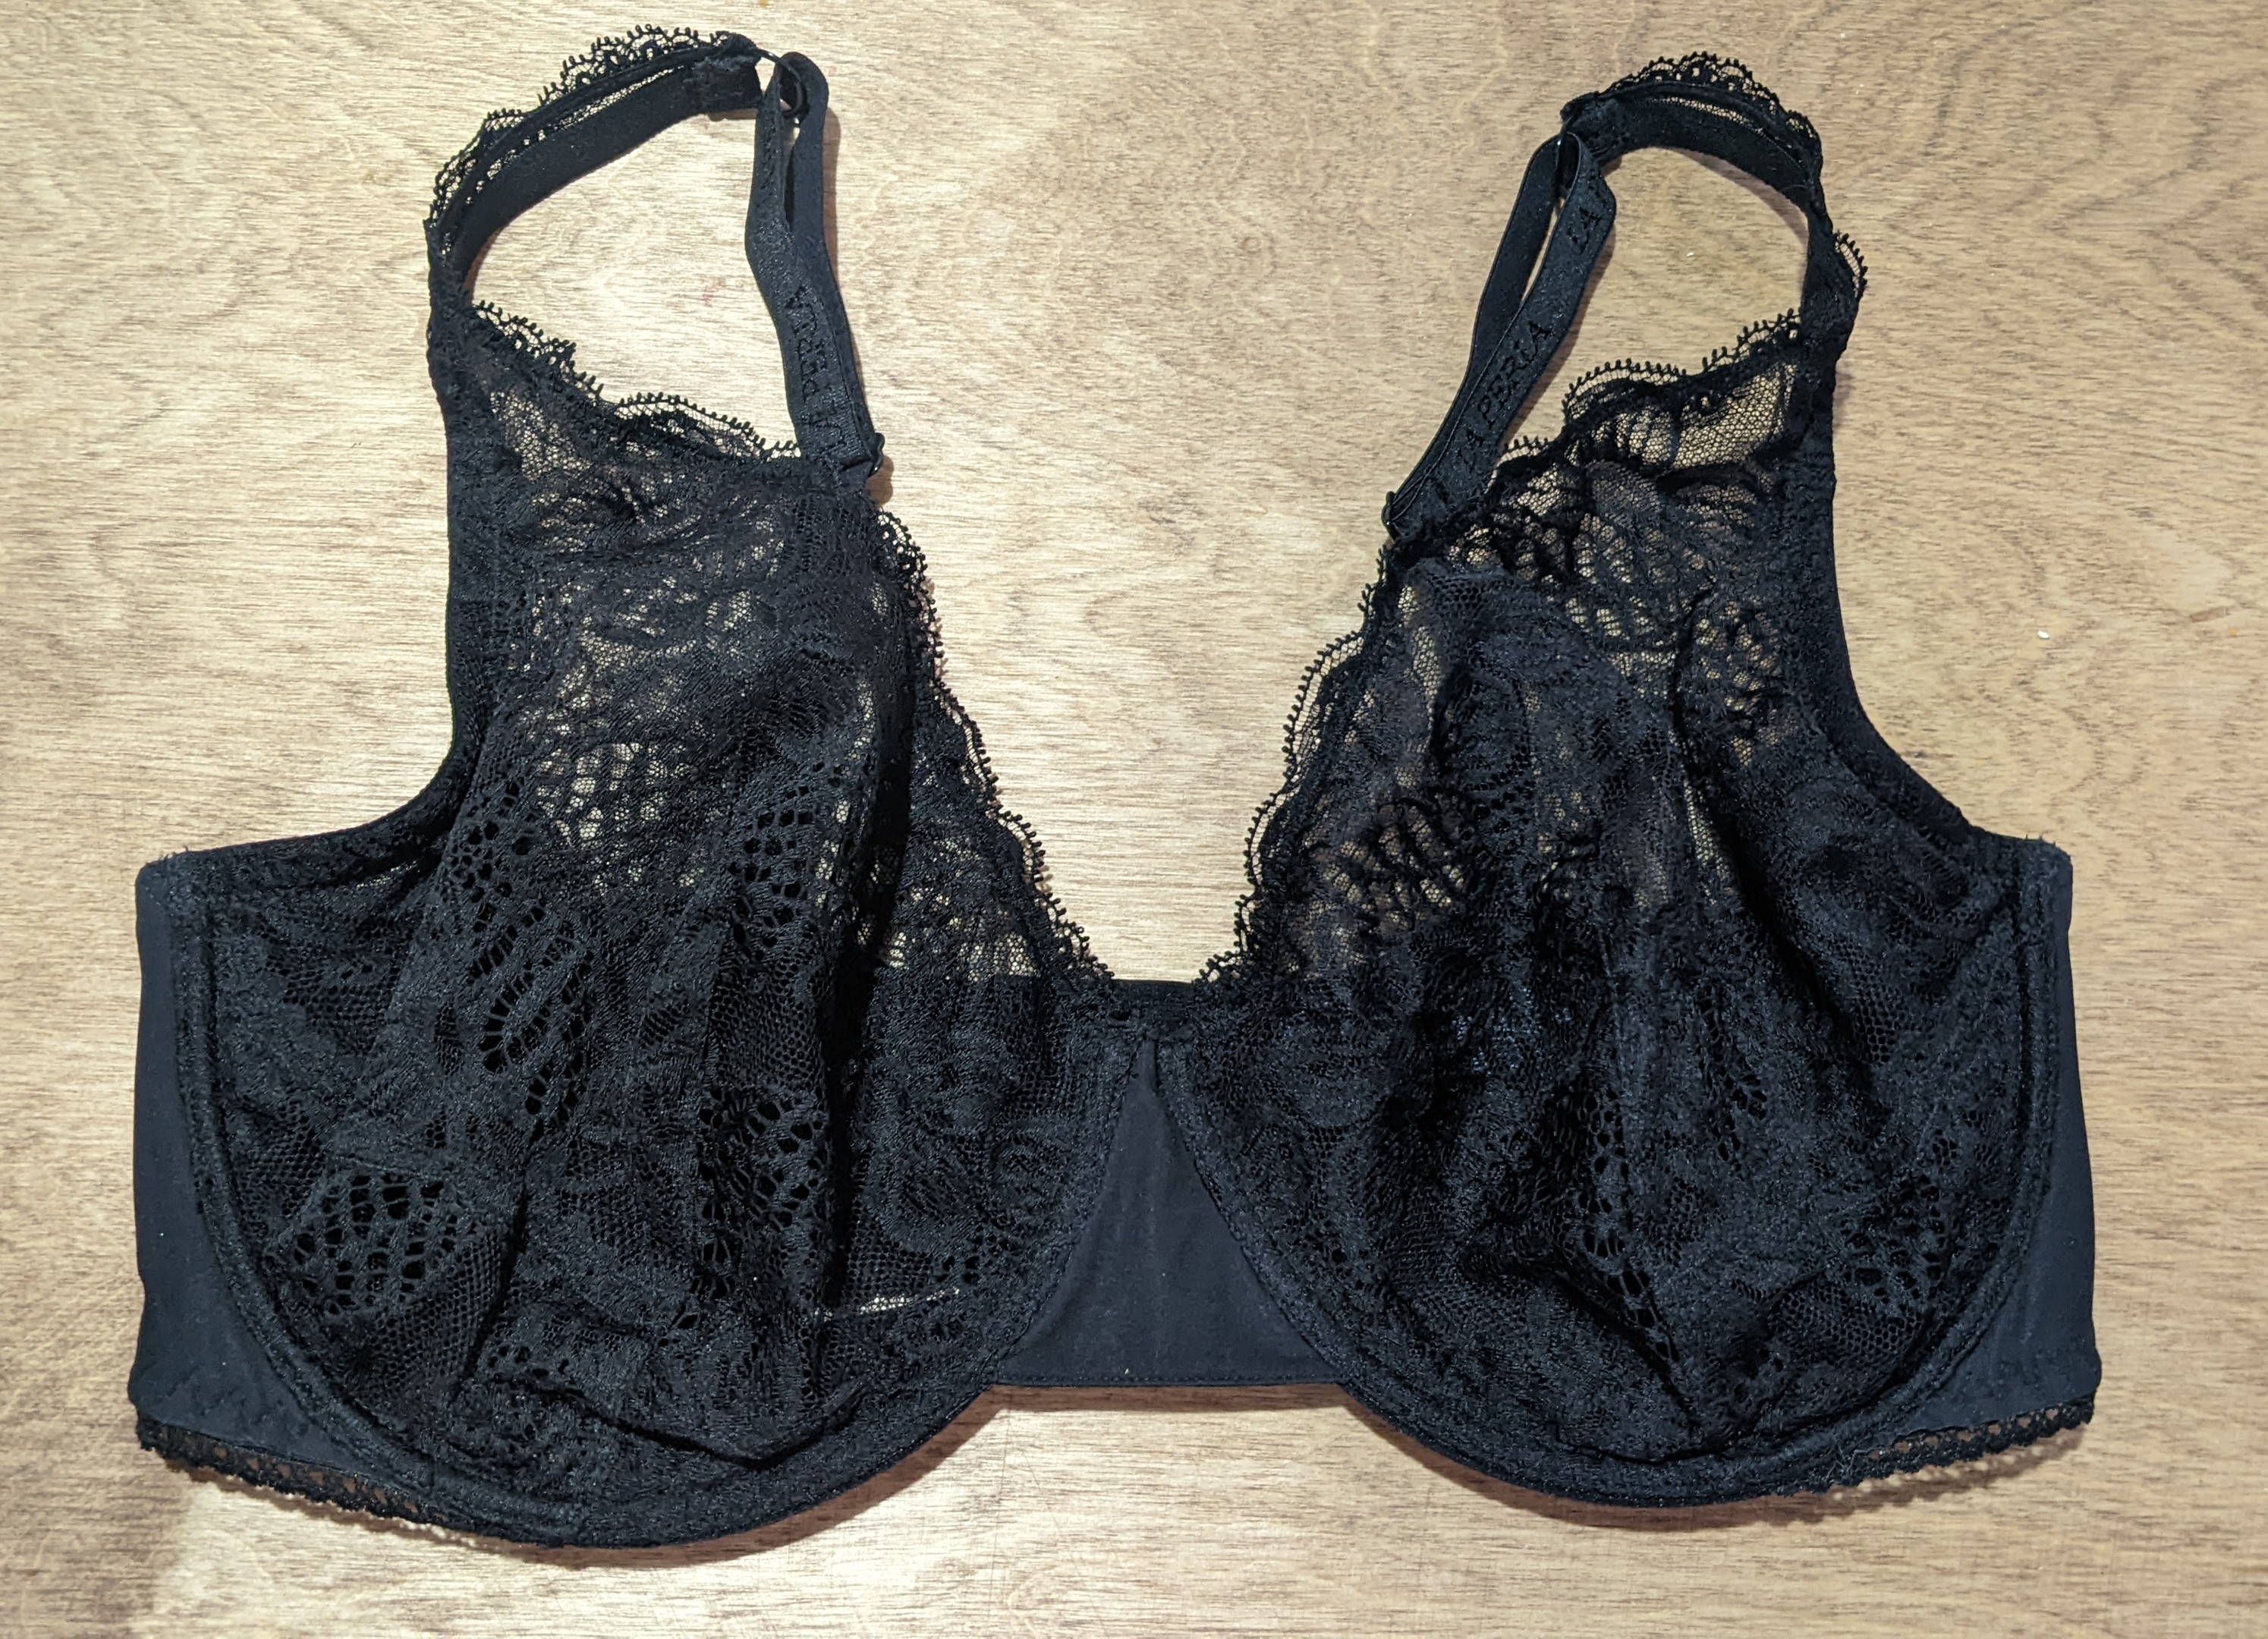 How To Find Your Perfect La Perla Bra Size